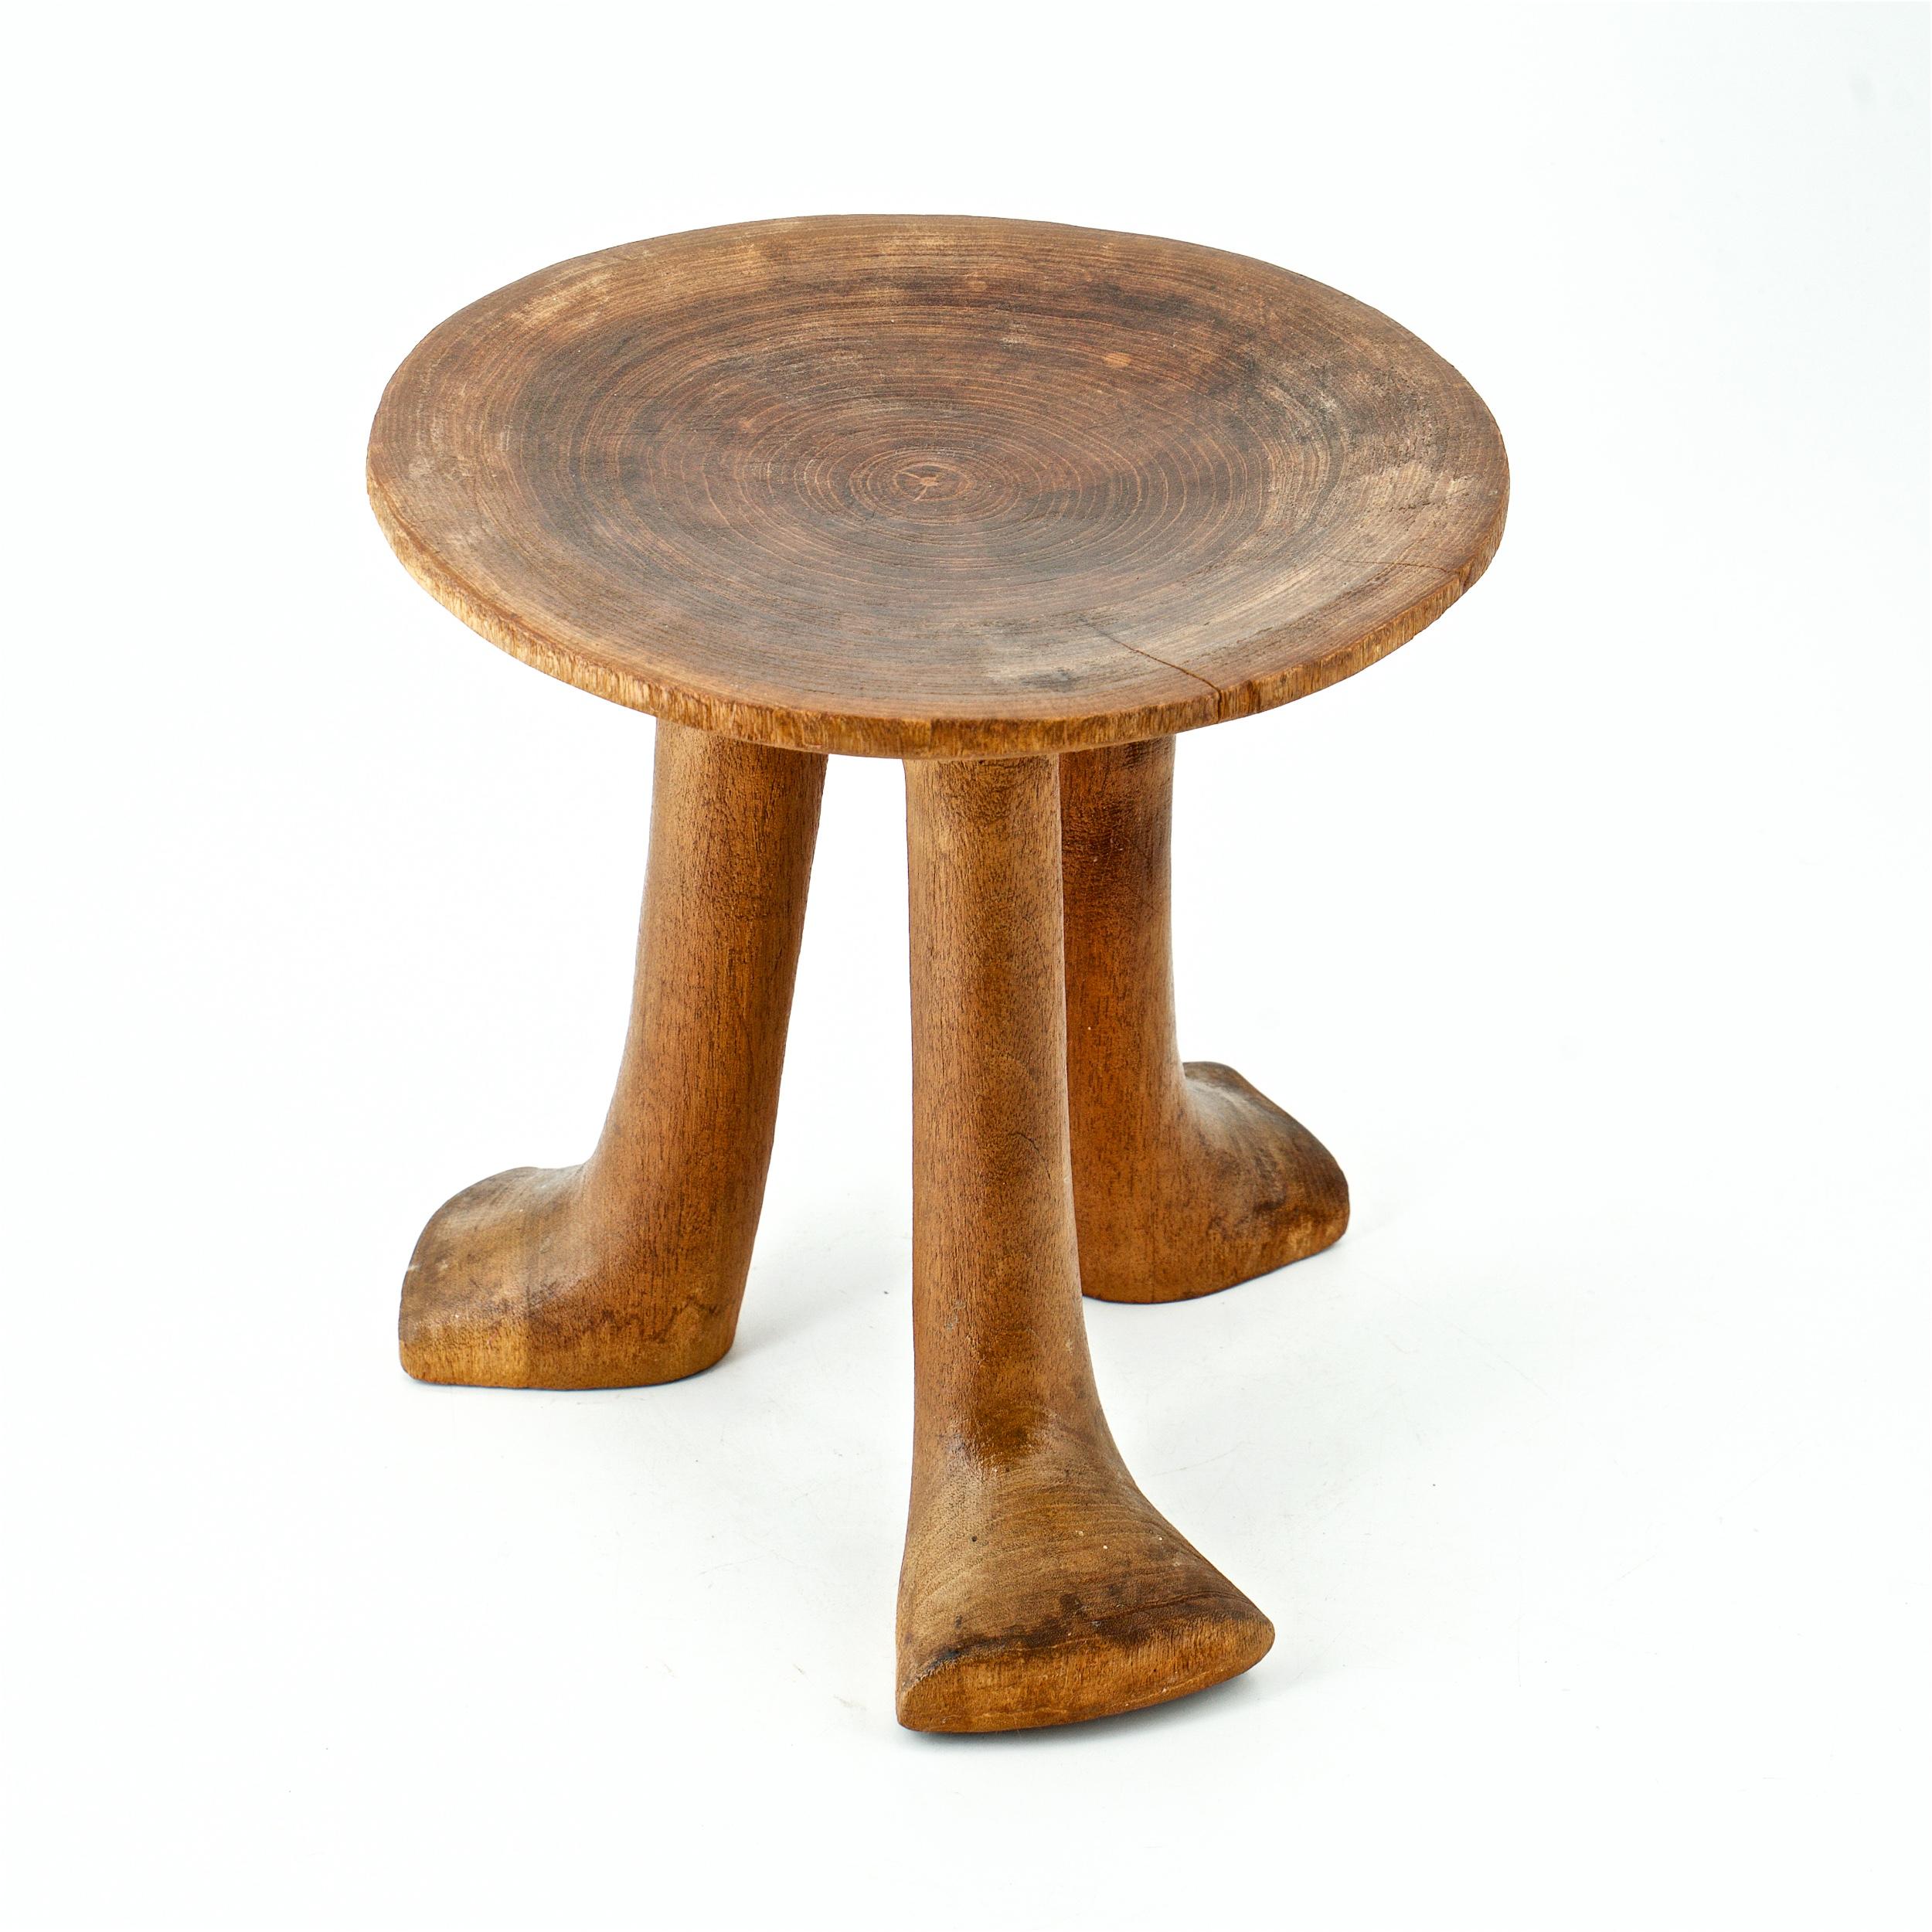 A teak tribal carved wood tripod stool, early to mid-20th Century. Origin unknown.